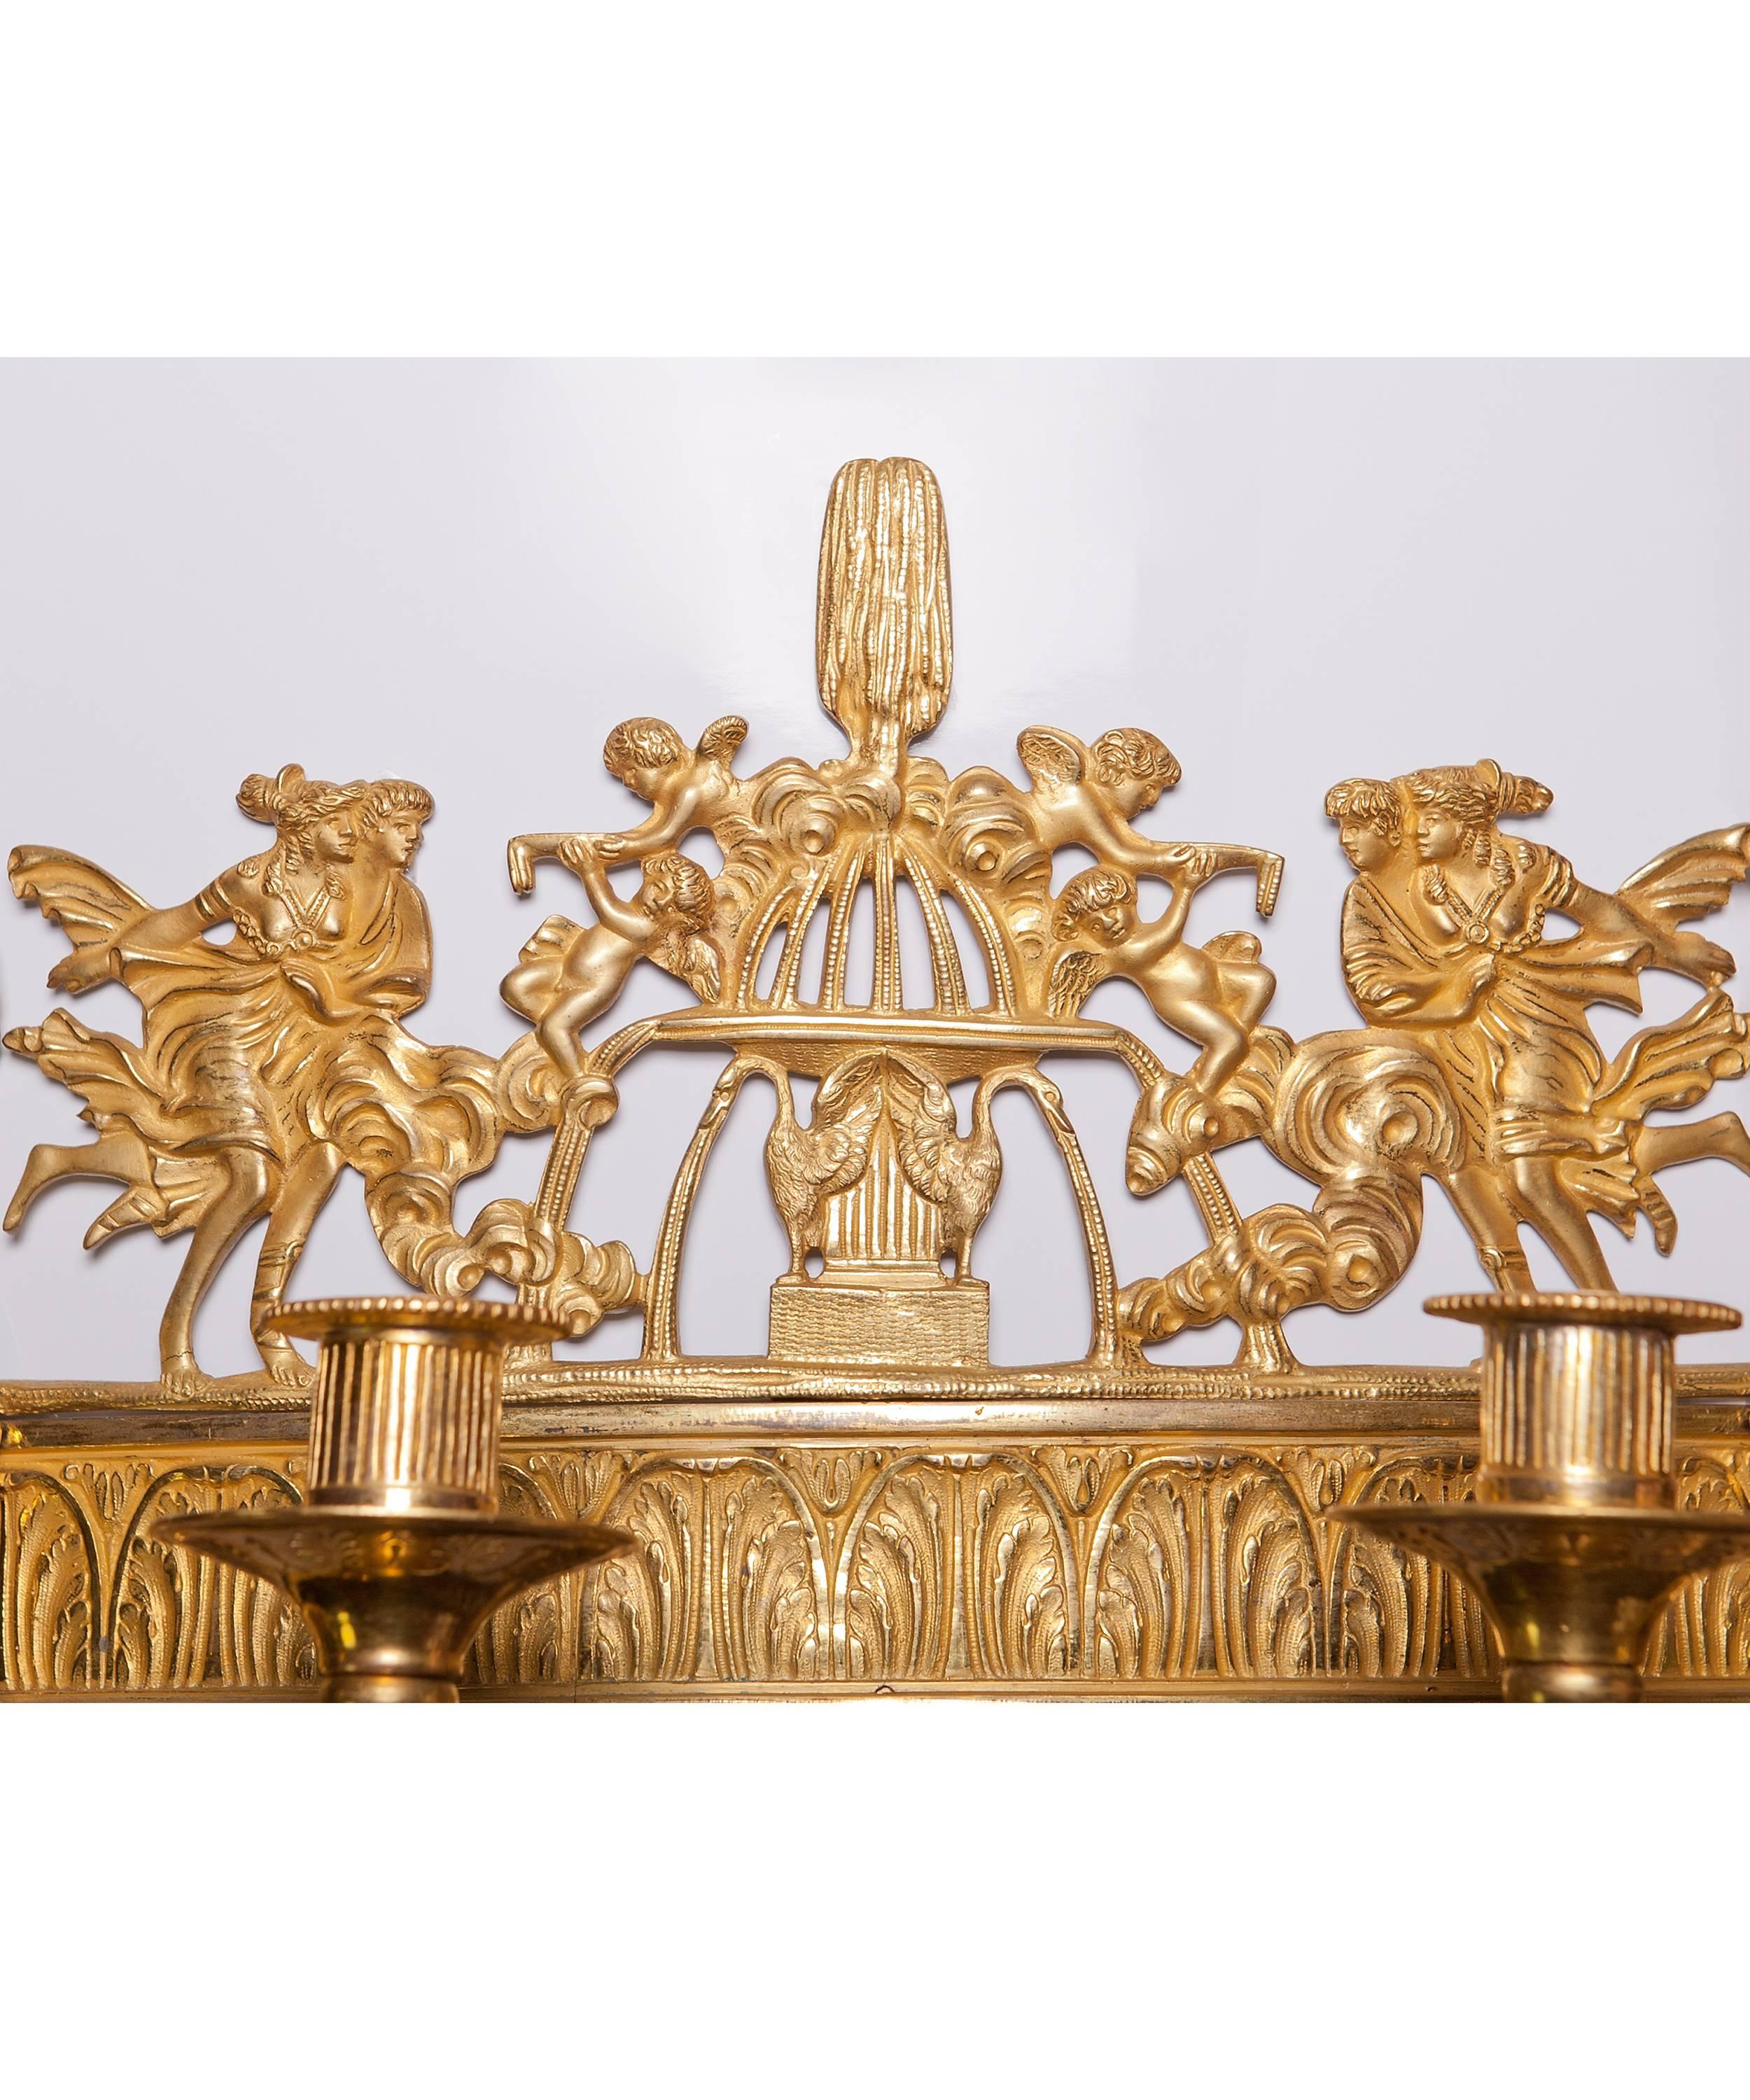 The eighteen-light chandelier is crowned with a gilded fire plateau decorated with 12 palm leaves and a pine-cone, from which large chains are leaving downwards to the centre ring. On this ring six three-light arms are decorated with the head of